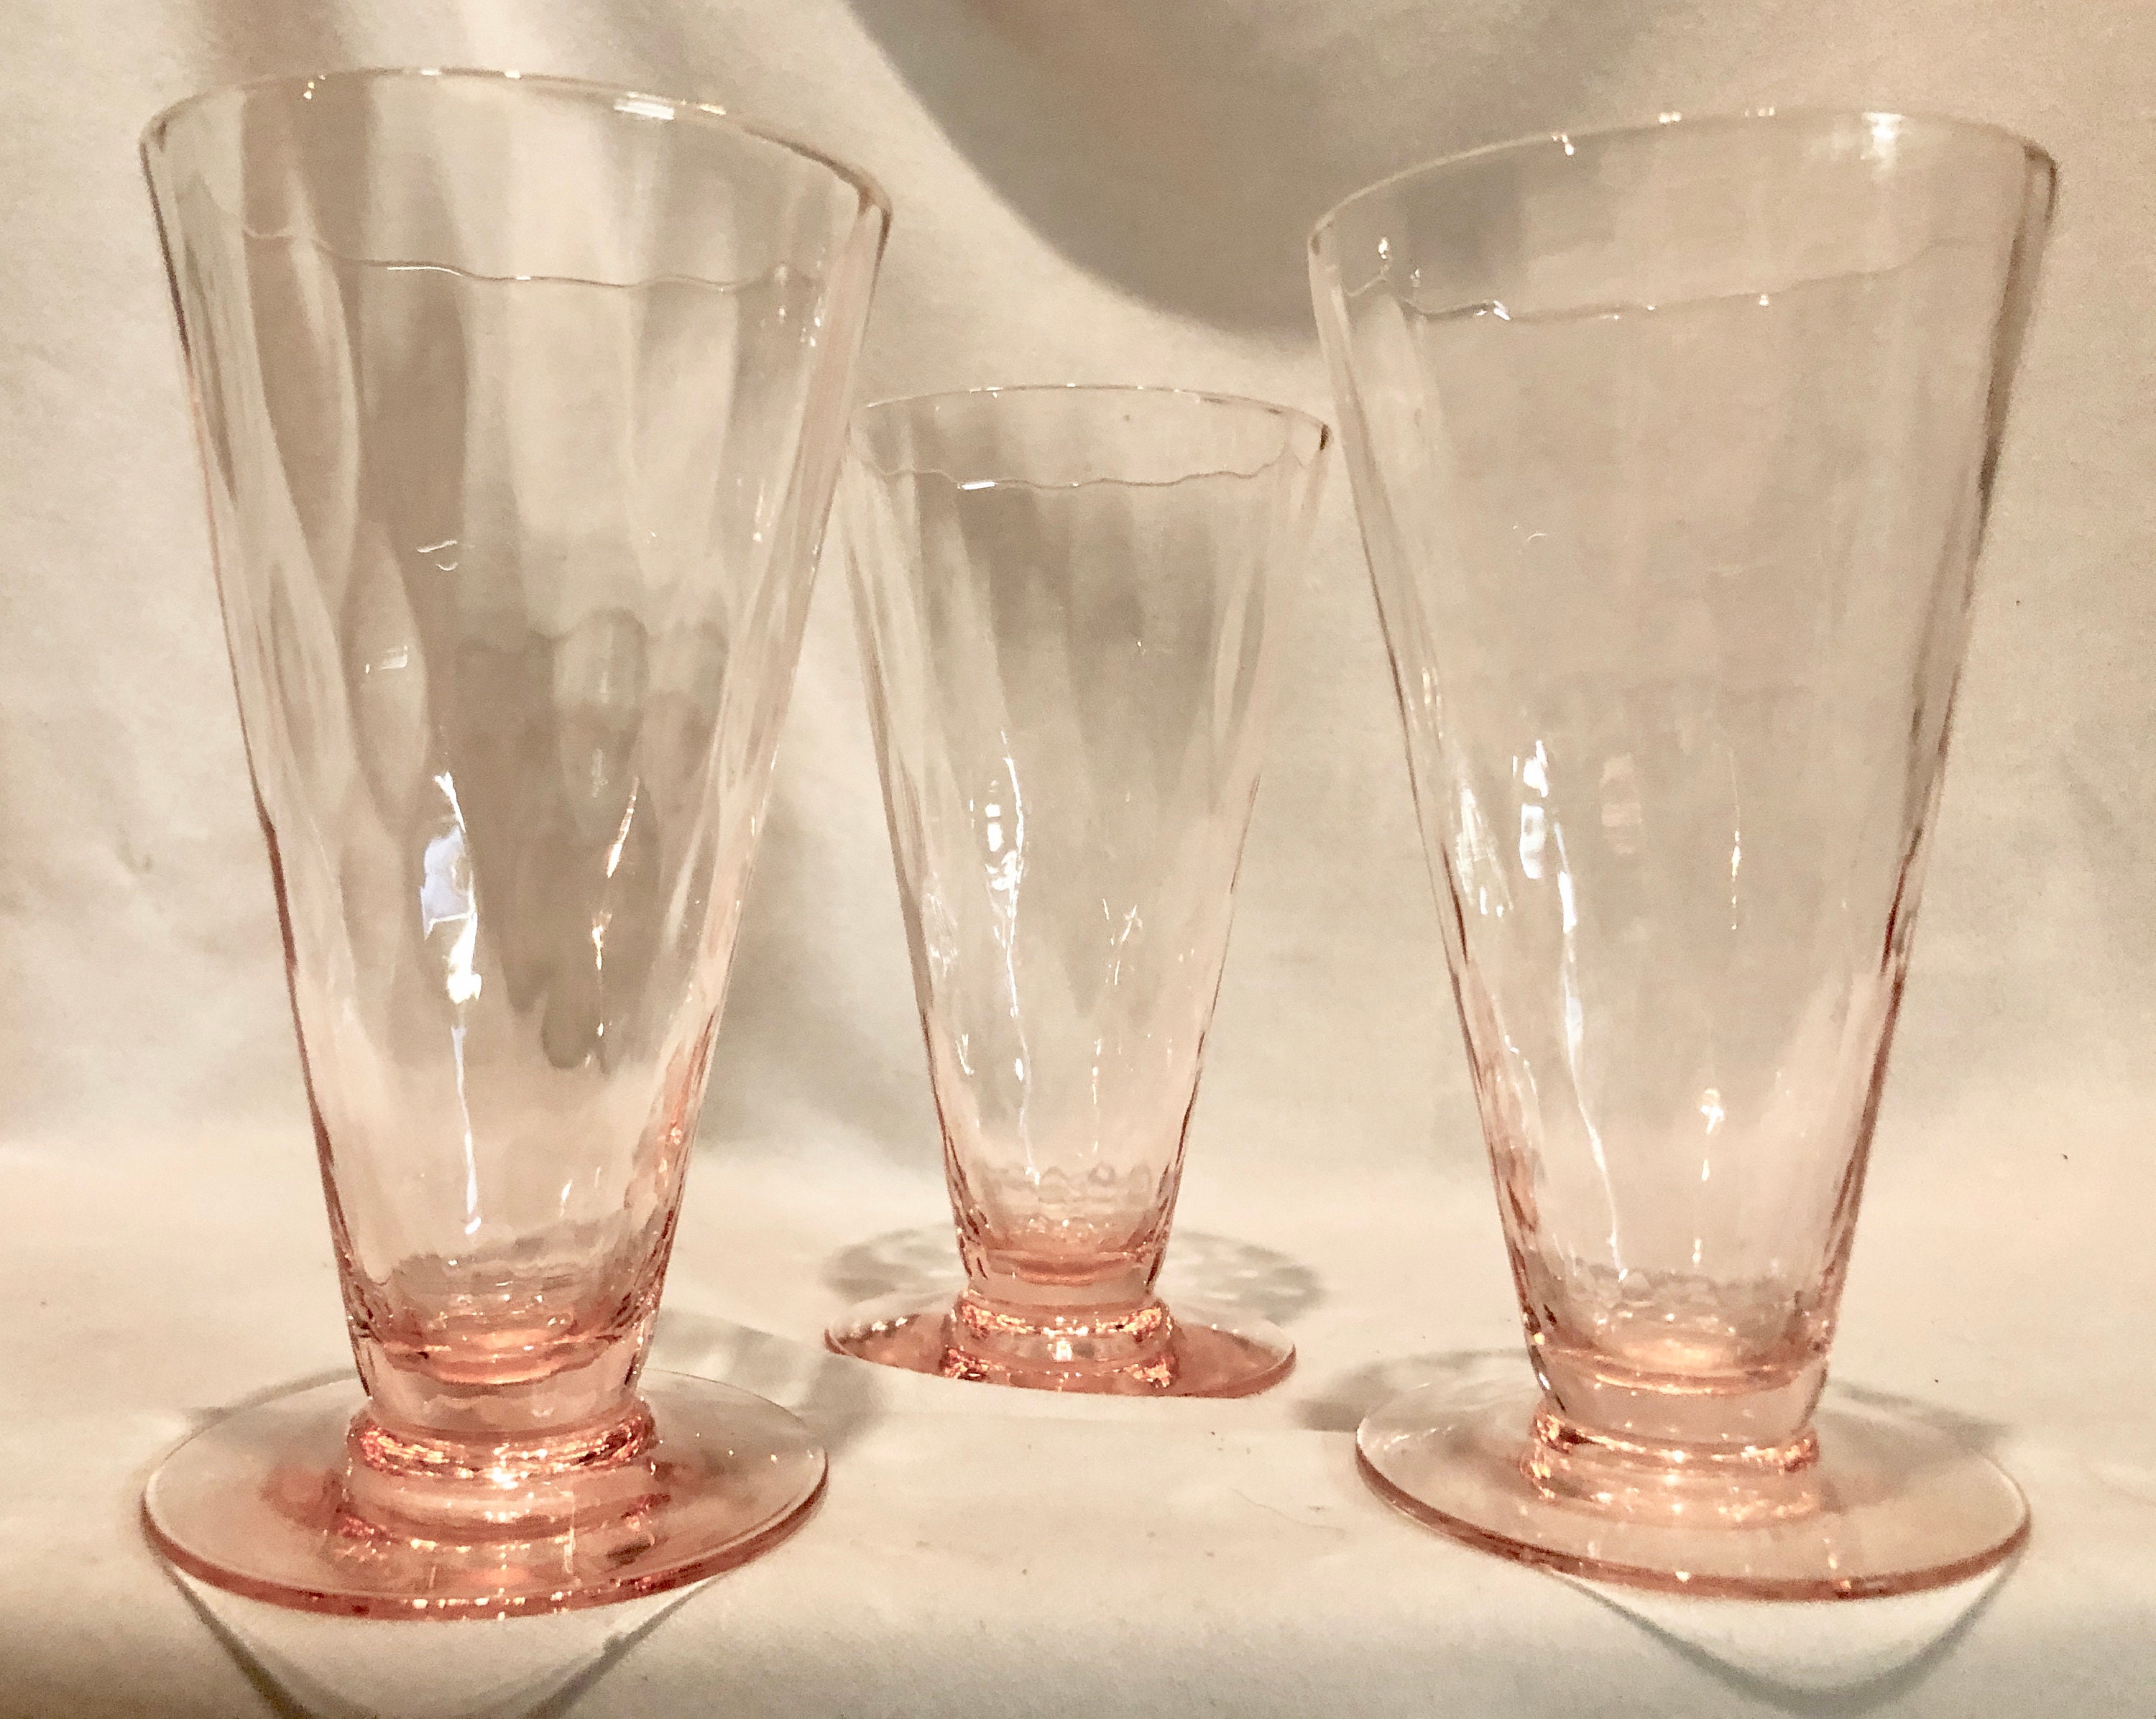 Oudine - Asymmetrical Glass Drinking Cup